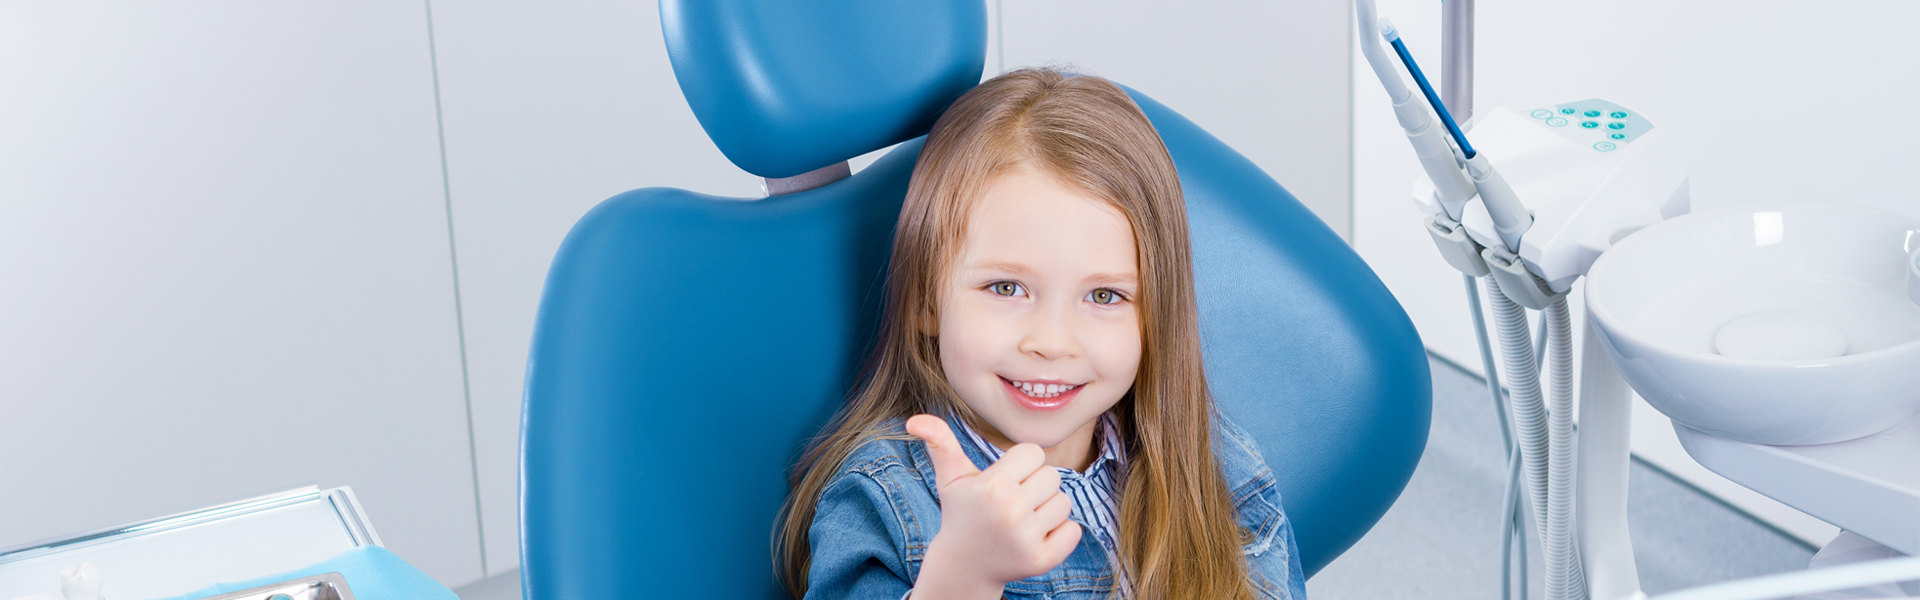 What food to eat and avoid for a child’s dental health